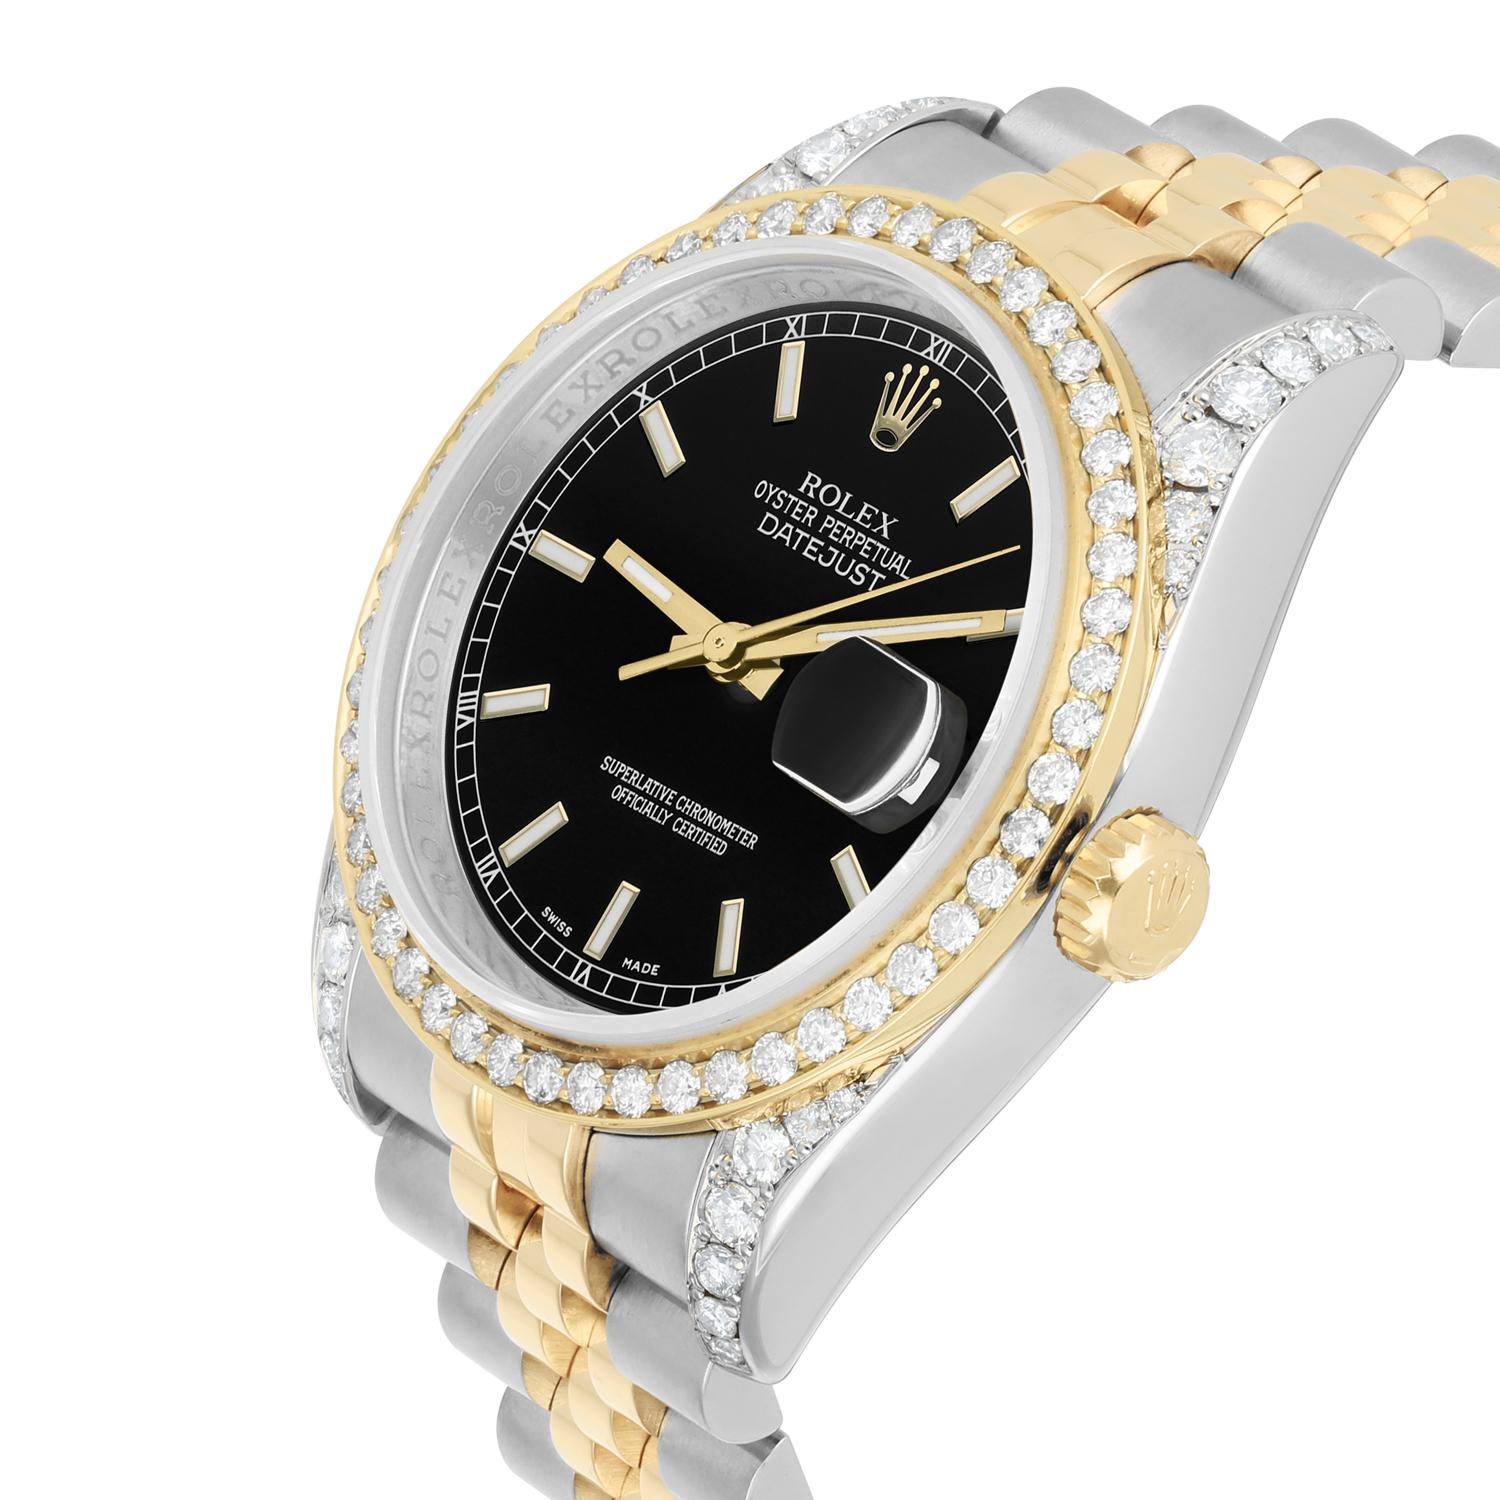 Rolex Datejust 36 Gold/Steel 116233 Black Index Dial Jubilee Band Diamond Watch In Excellent Condition For Sale In New York, NY